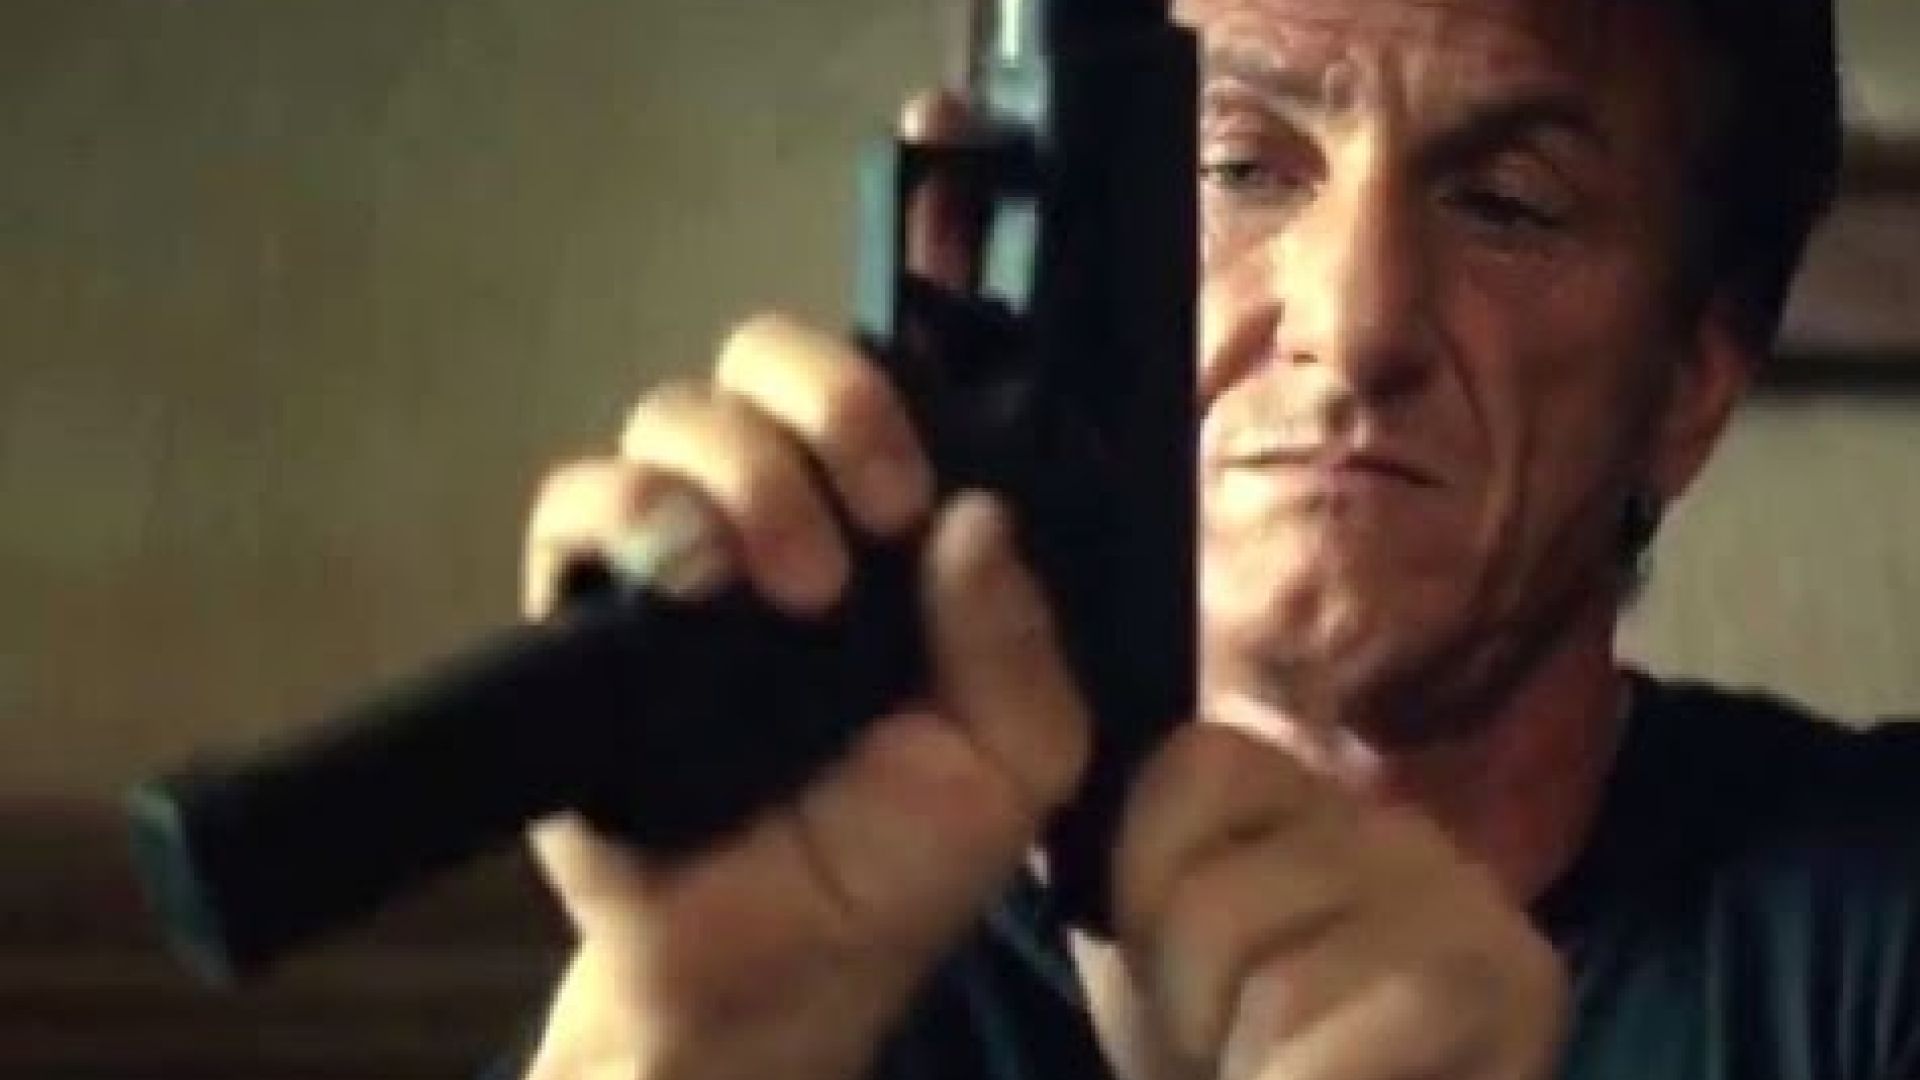 Official Trailer for 'The Gunman'